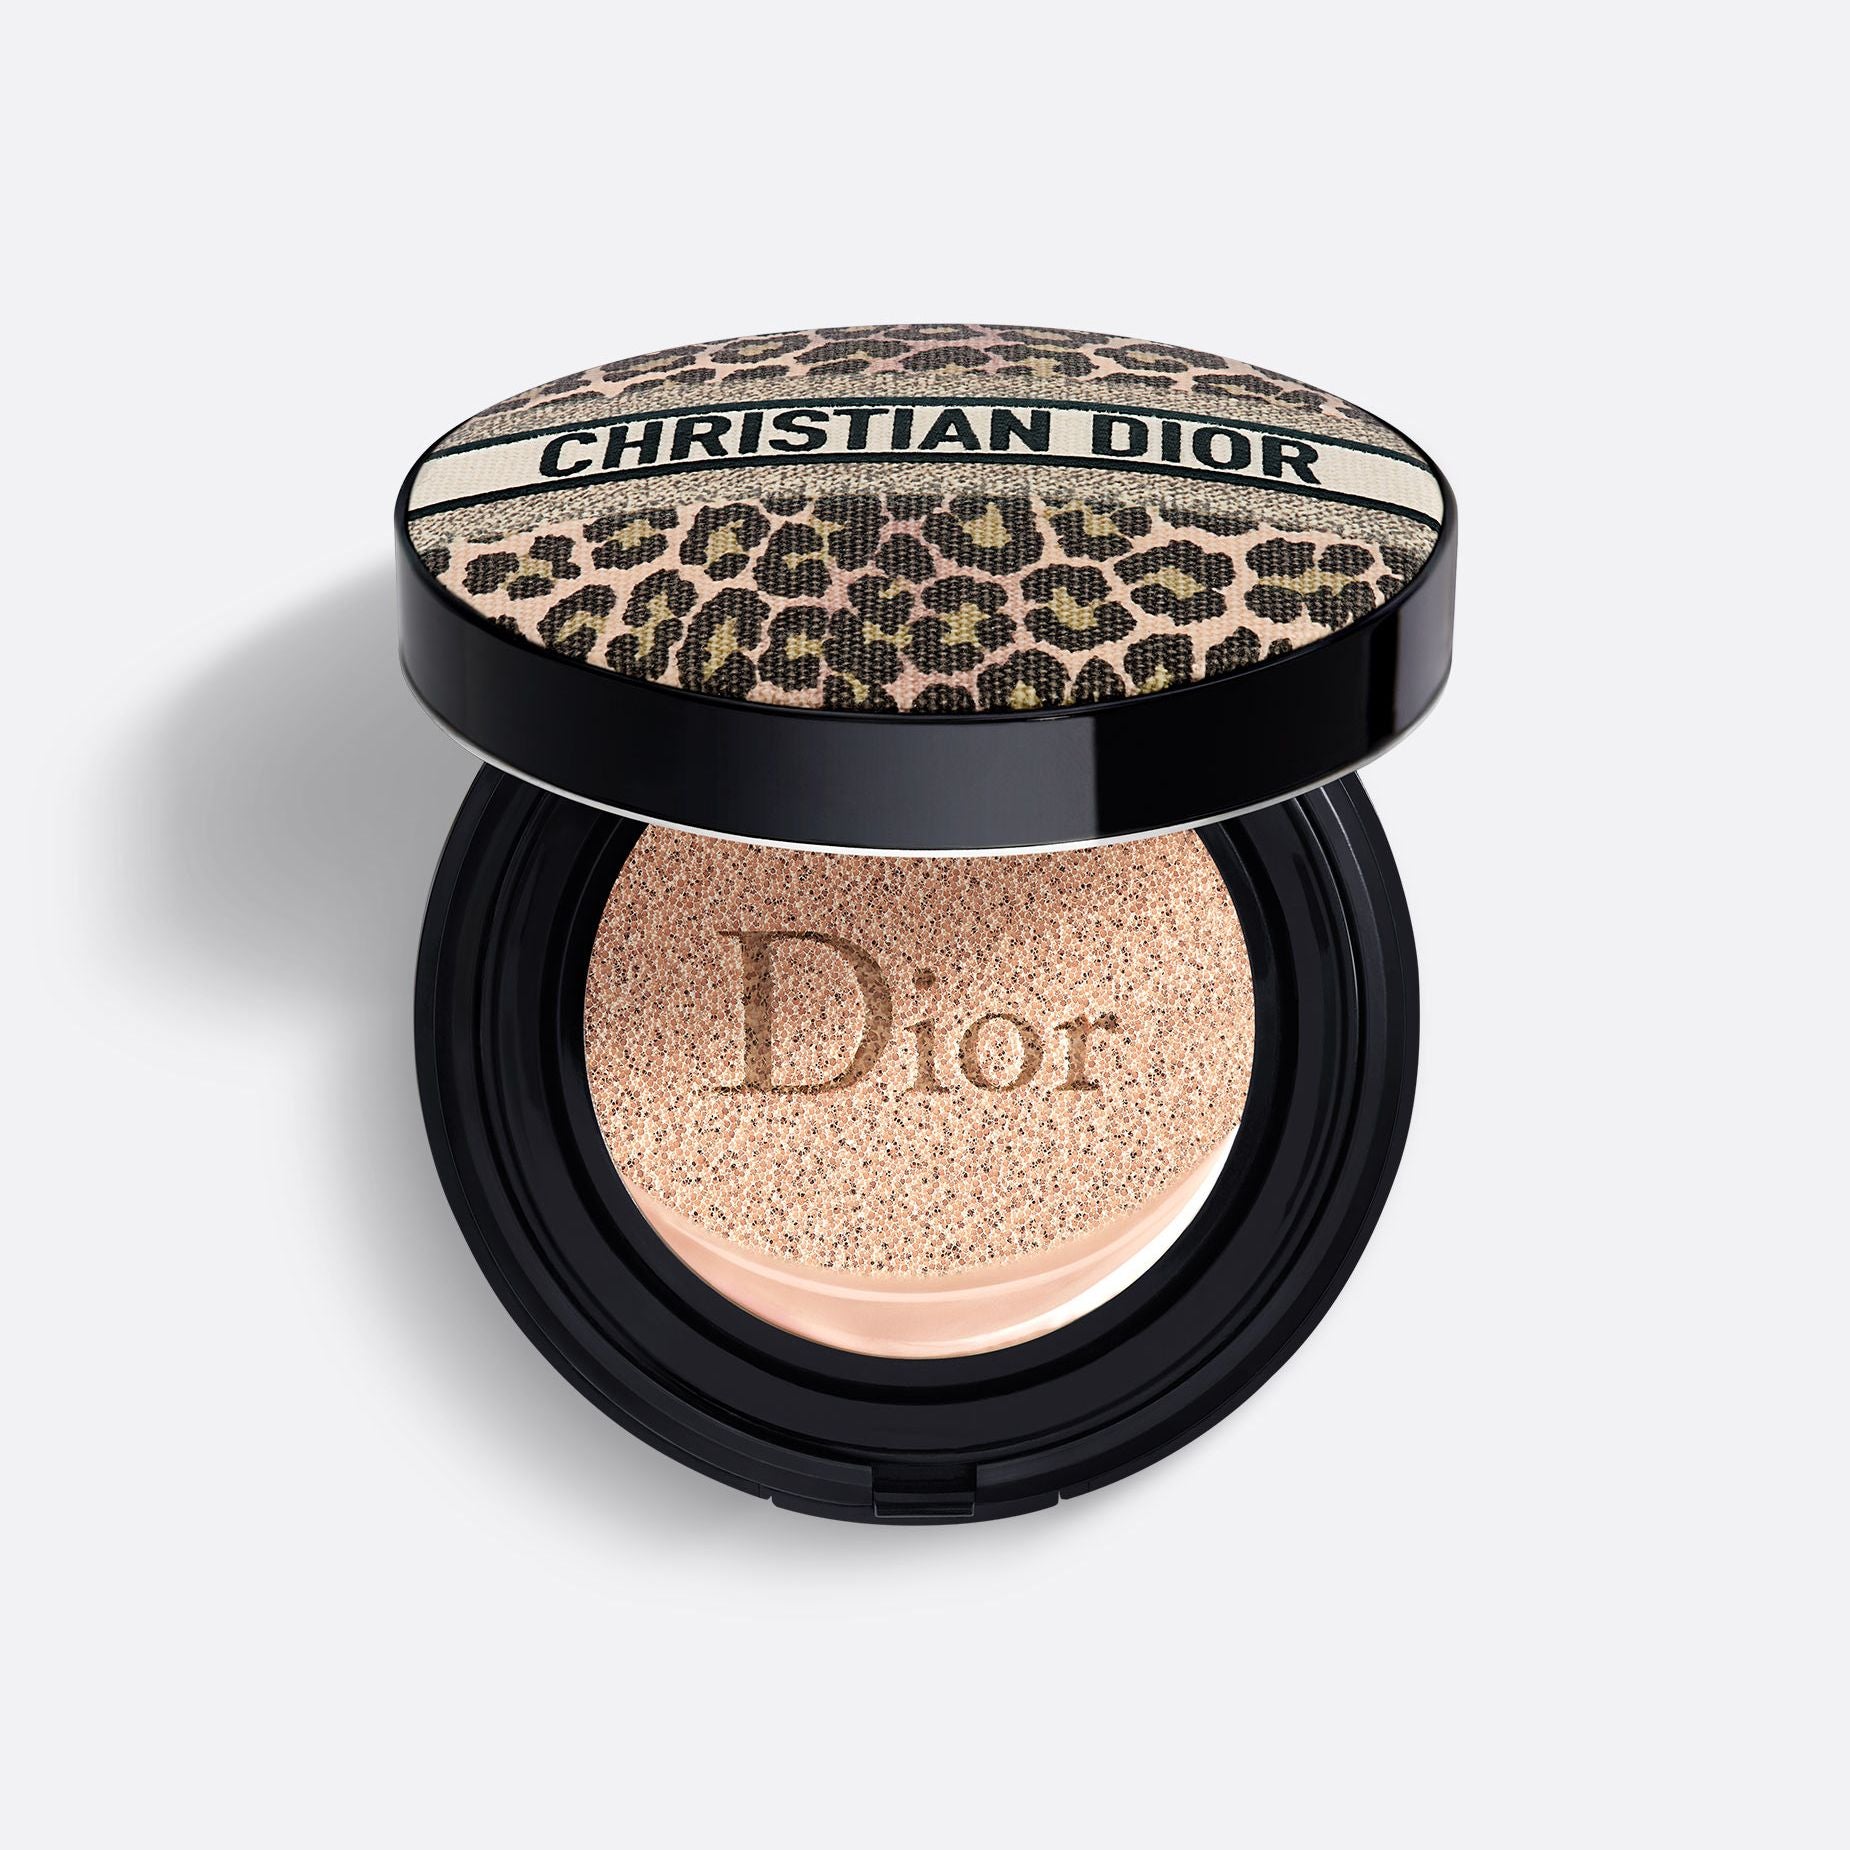 DIOR FOREVER COUTURE PERFECT CUSHION - MITZAH LIMITED EDITION ~ 24-hour wear foundation - moisturizing - luminous matte and glow finishes - infused with floral skincare